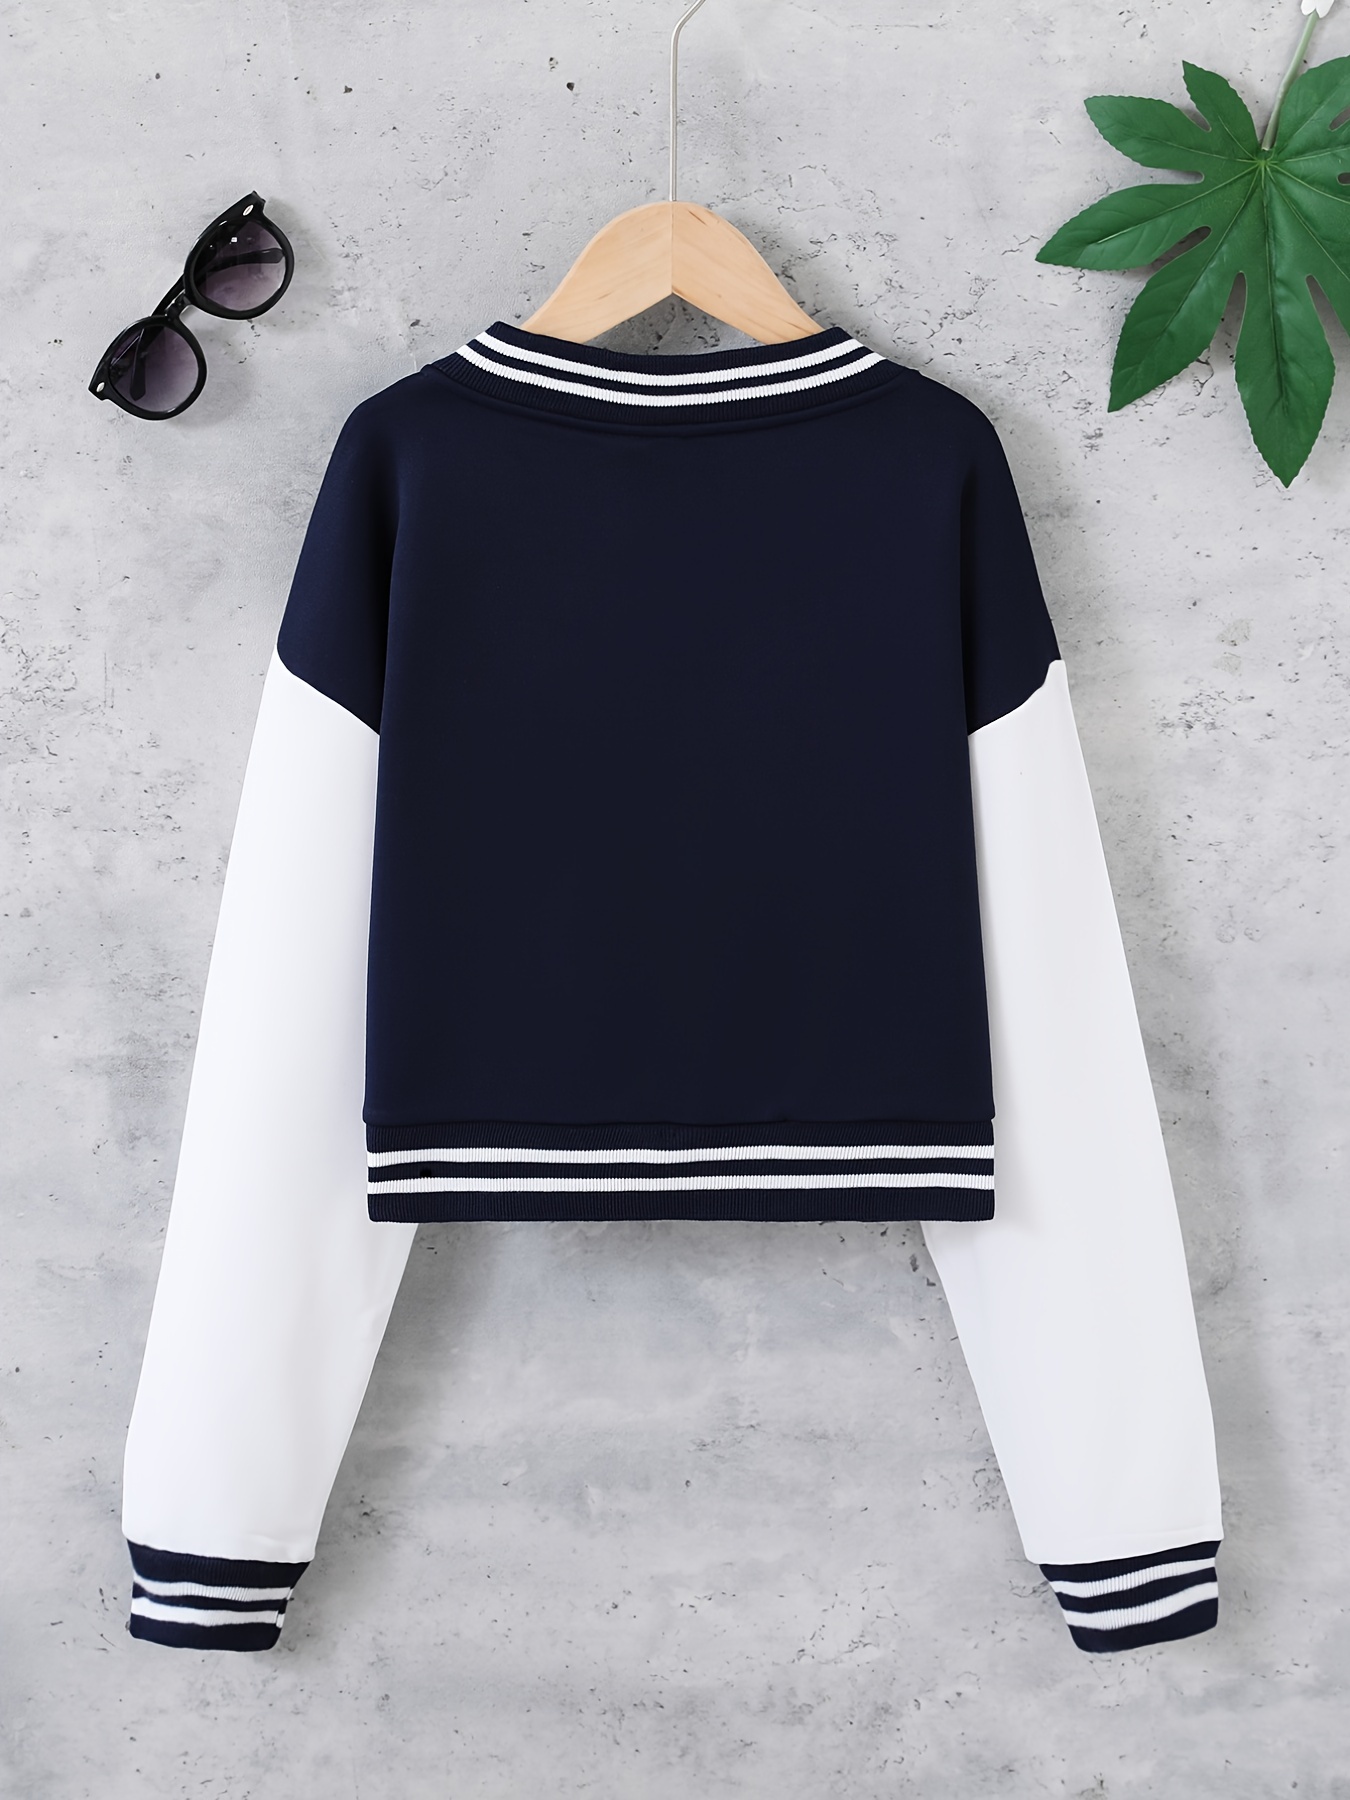 Toddler Girl's Color Block Button Casual Varsity Jacket, Kids Clothing For  Fall/ Spring